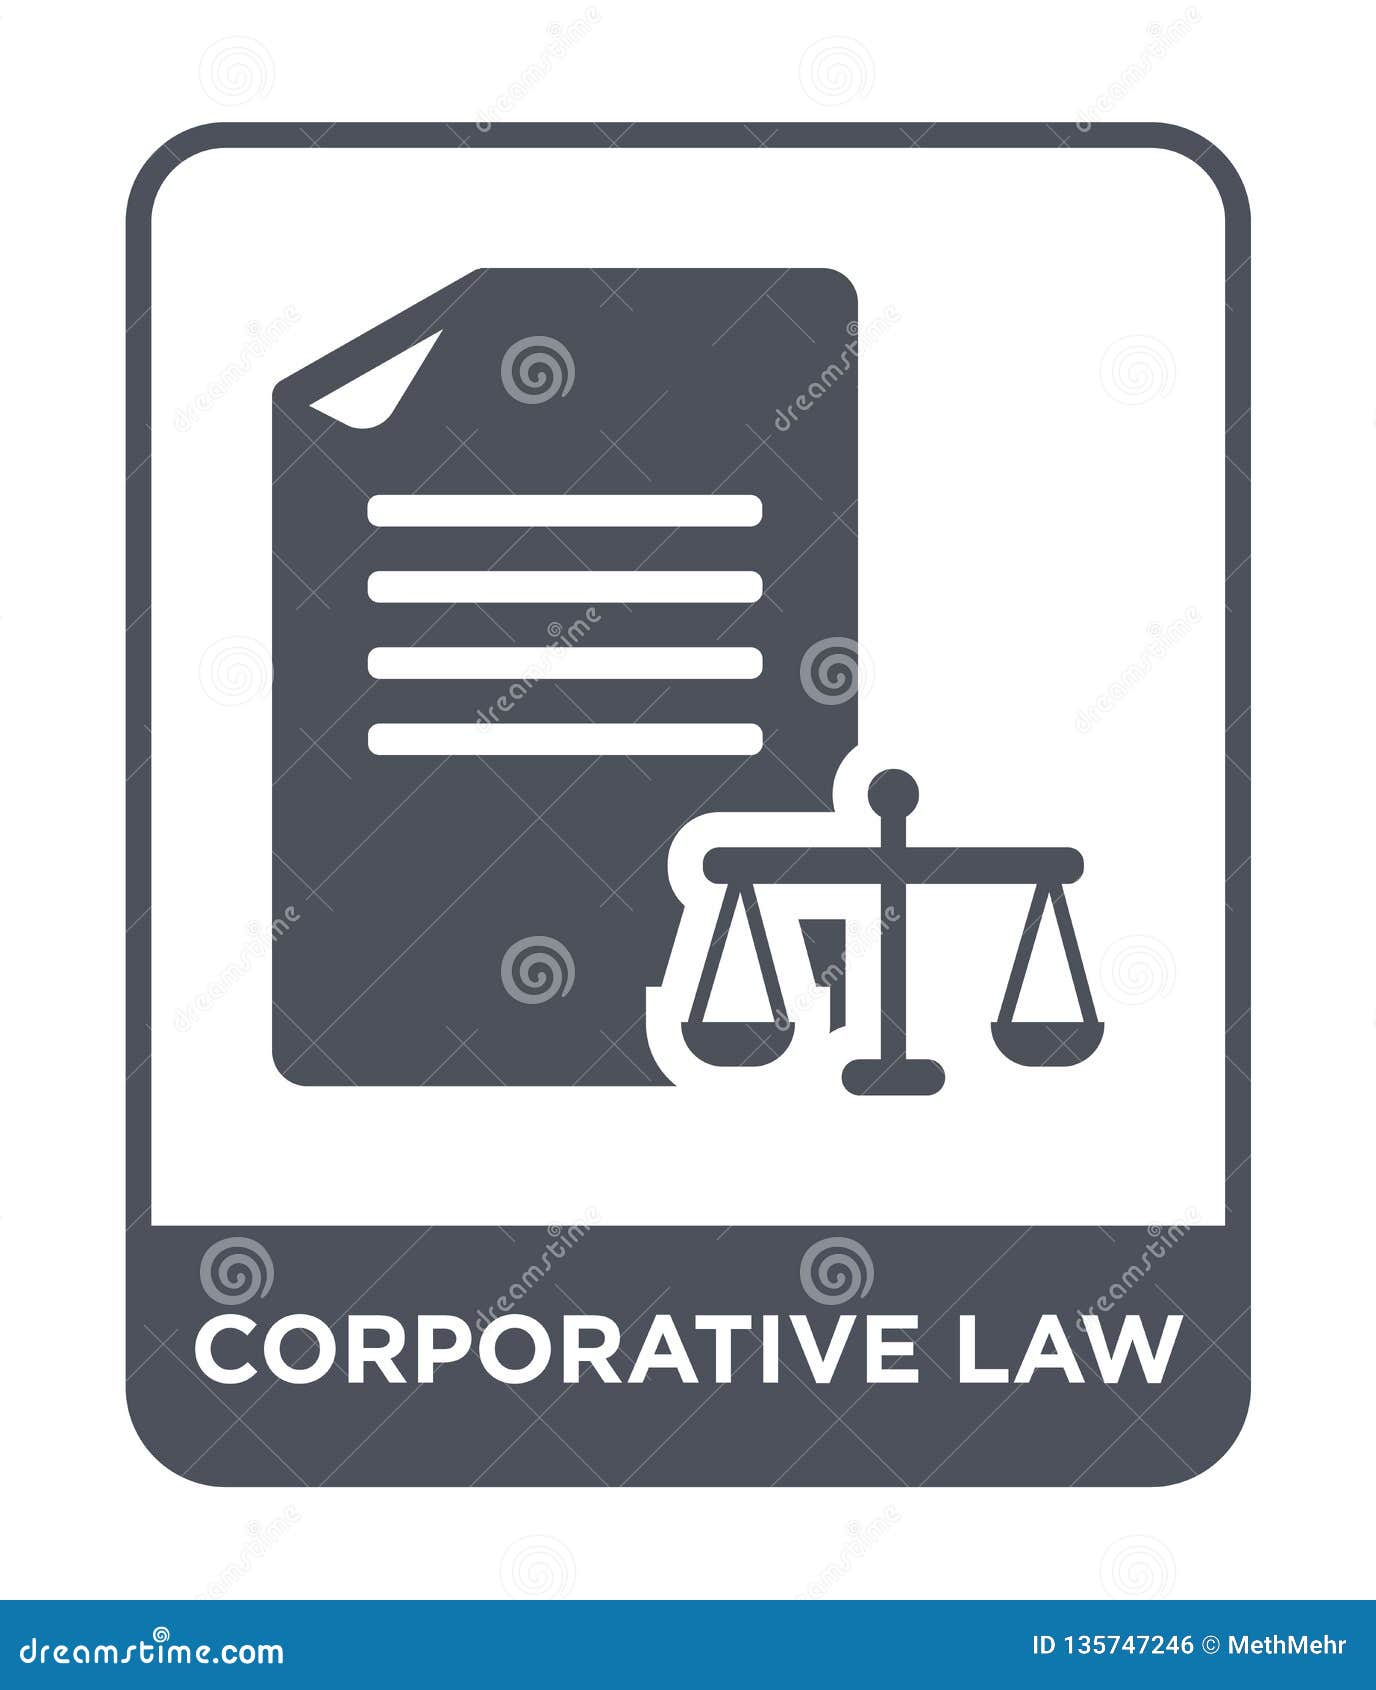 corporative law icon in trendy  style. corporative law icon  on white background. corporative law  icon simple